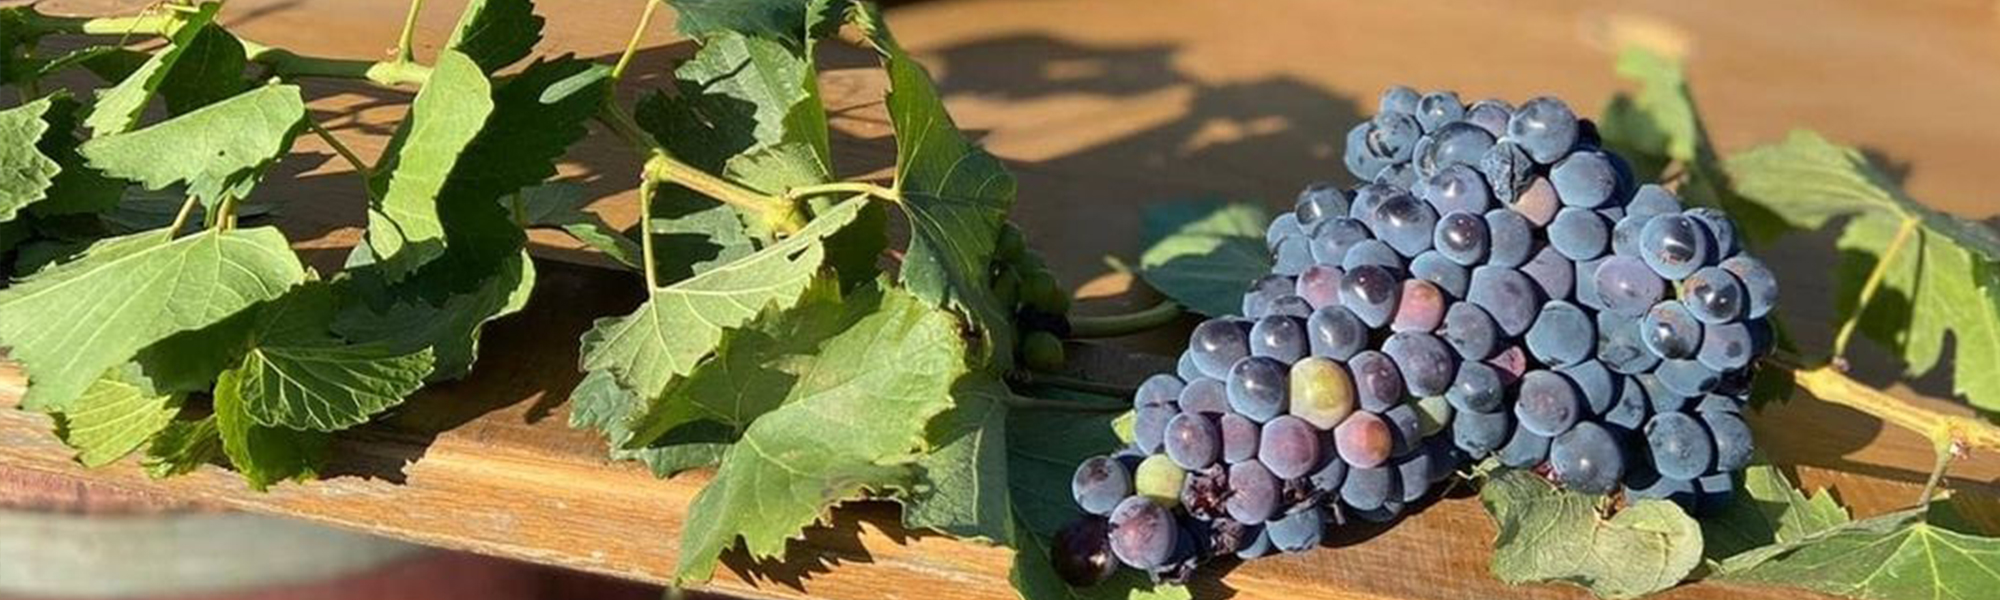 grape variety on table at stettyn family vineyards, wine farm in South Africa